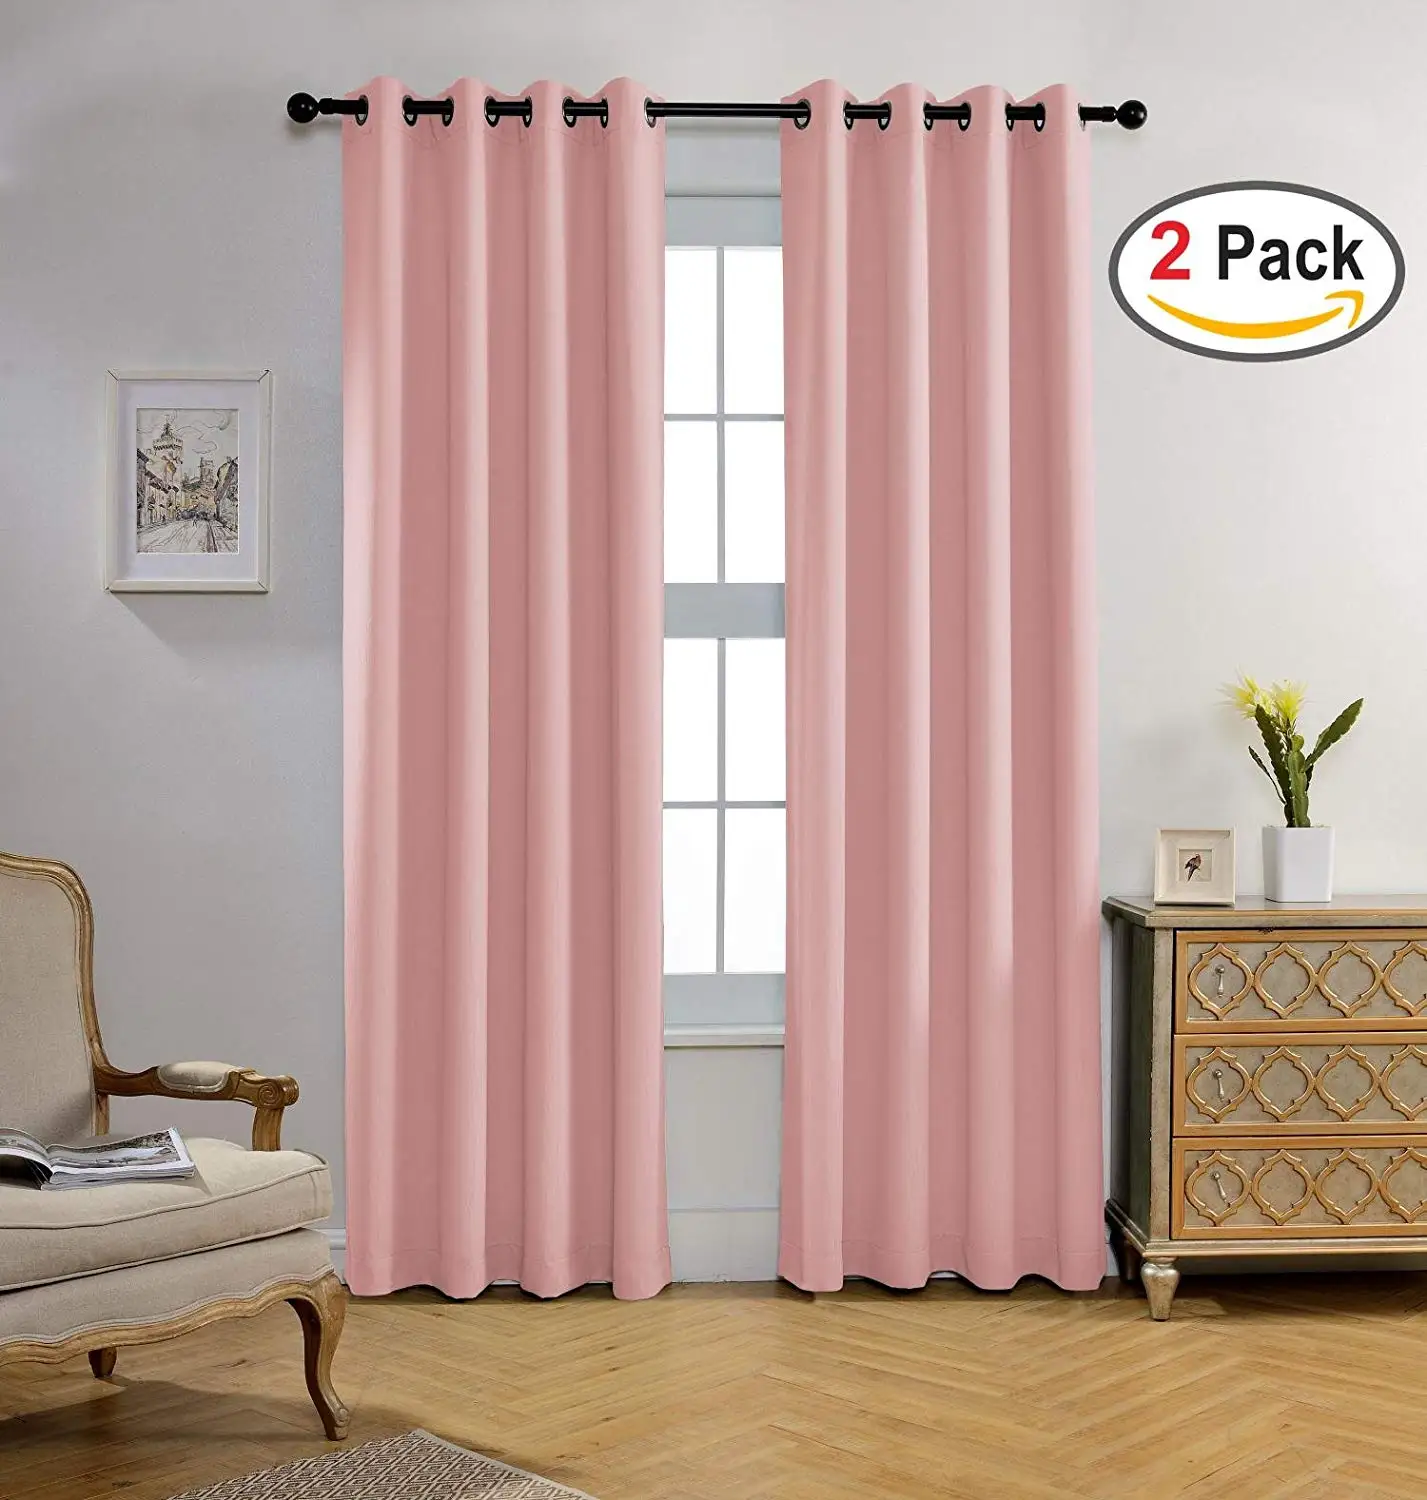 Cheap Kids Pink Curtains, find Kids Pink Curtains deals on line at ...